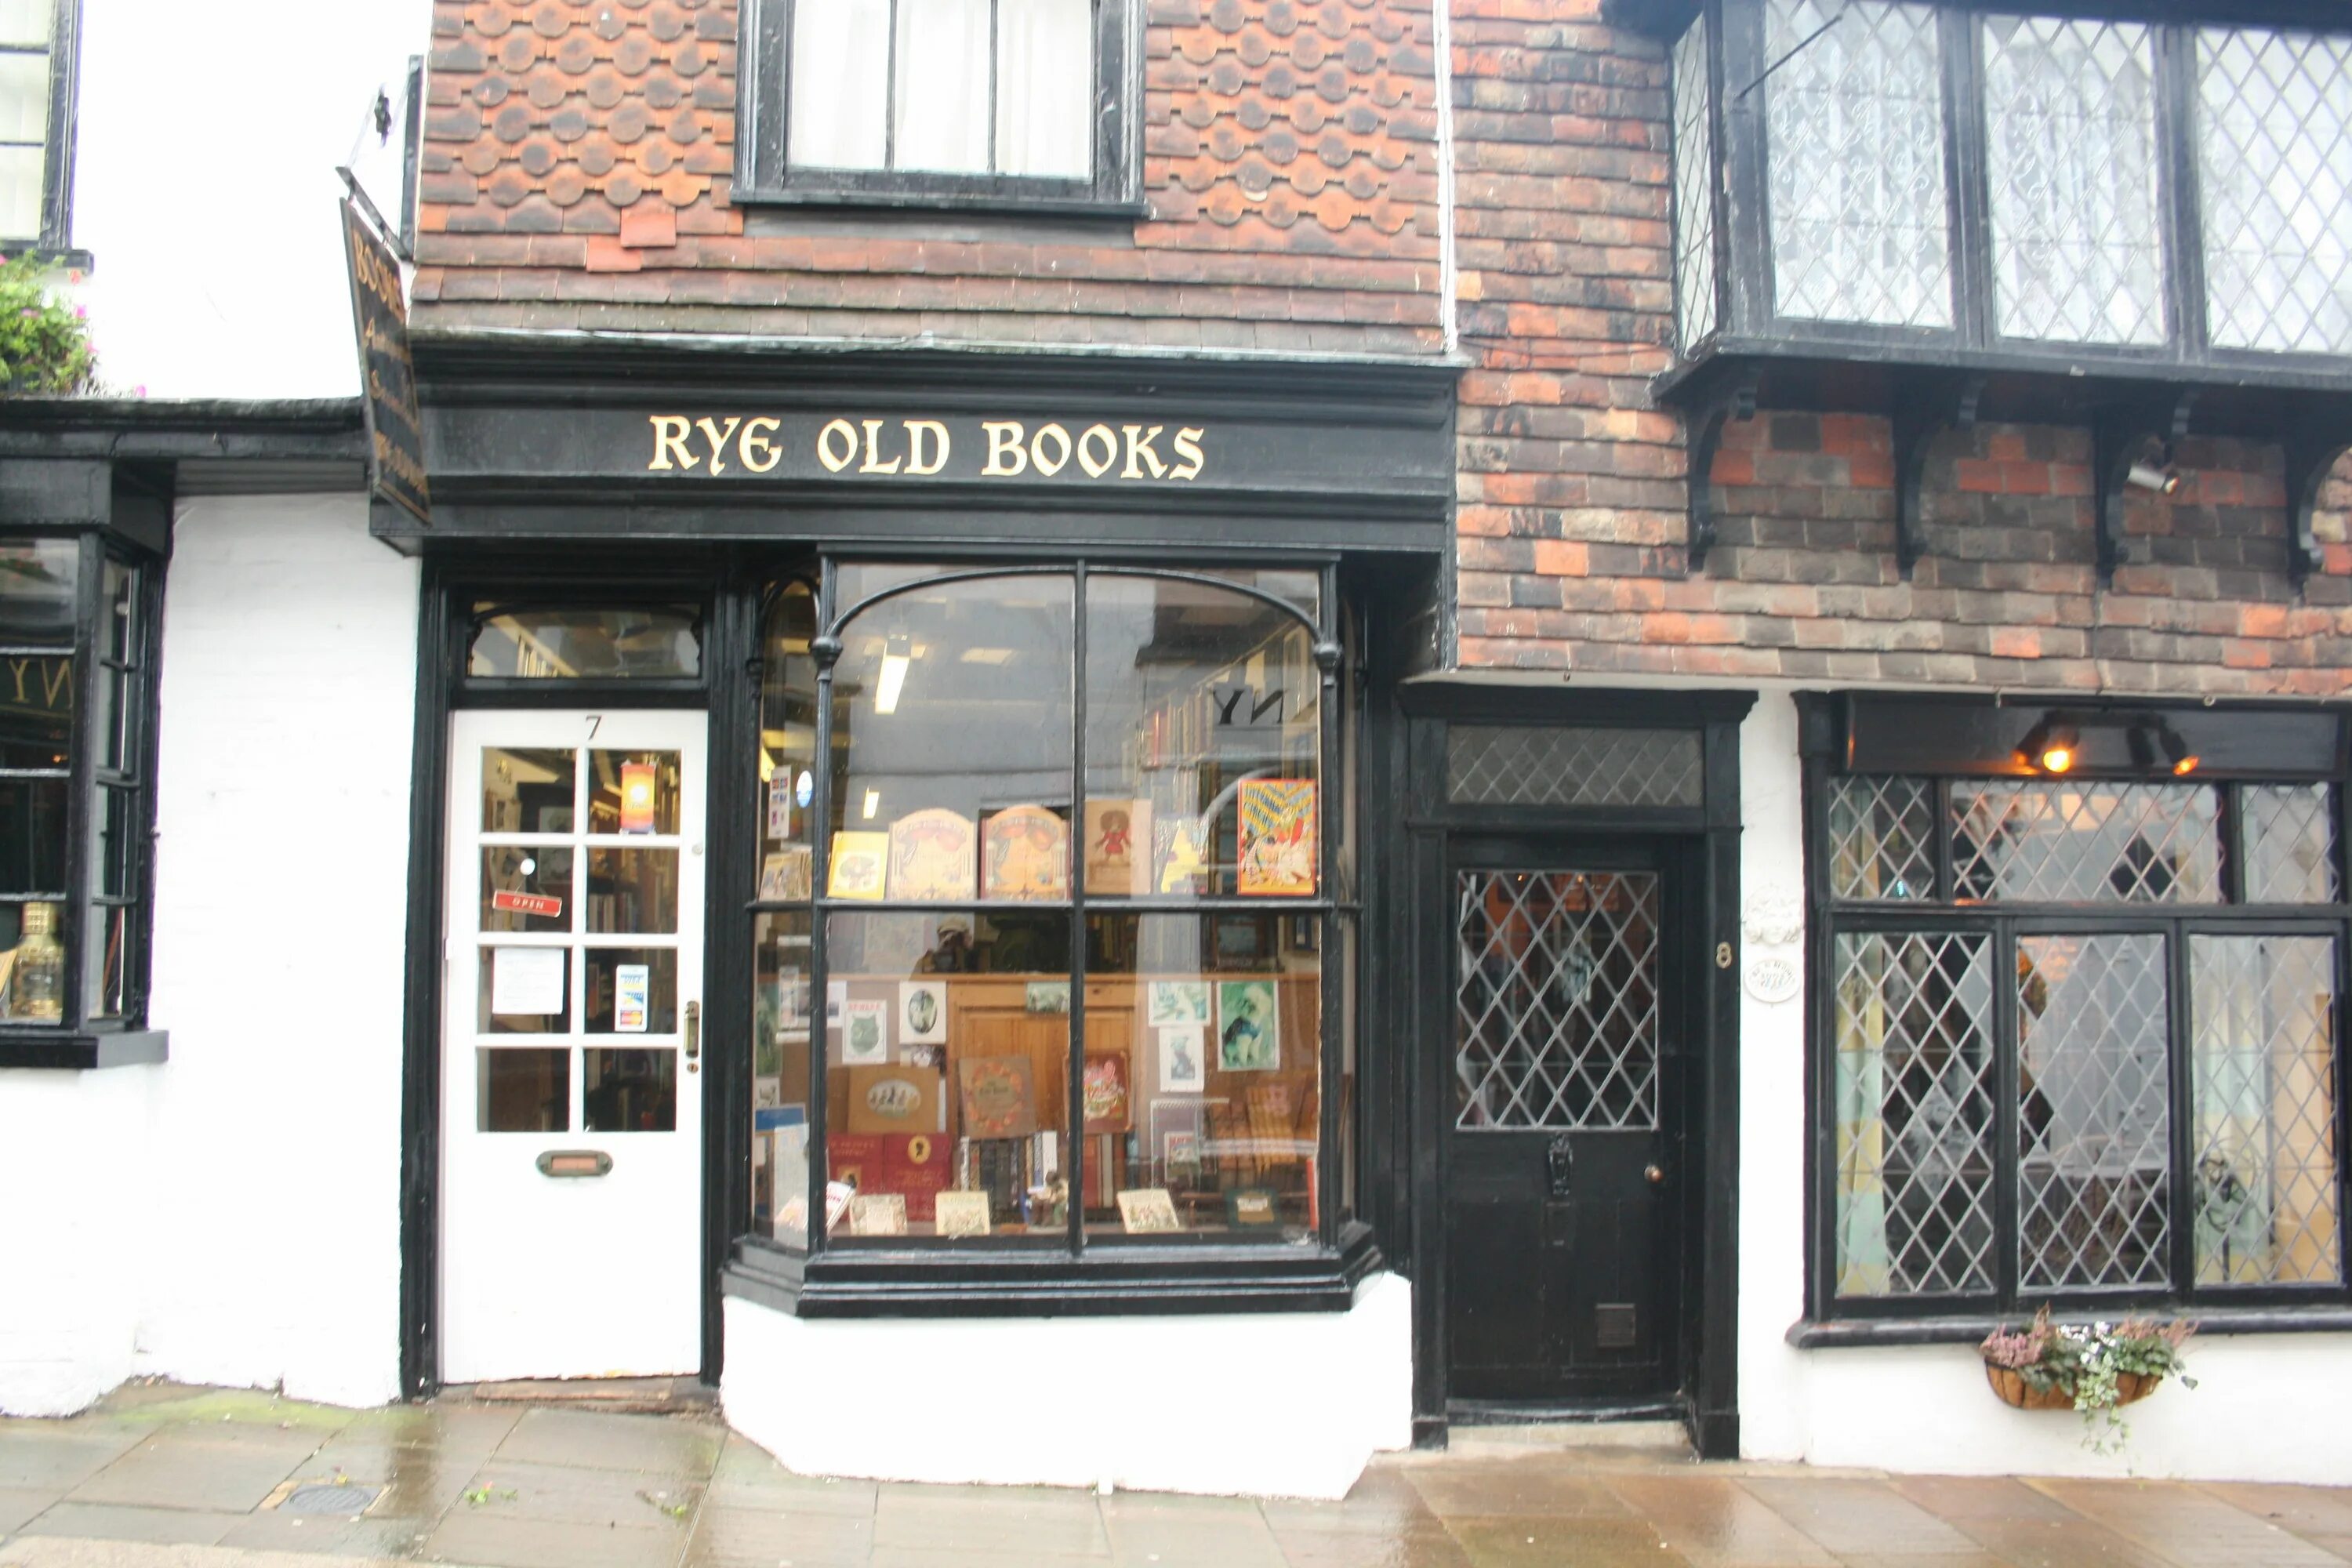 The Bookshop in England. Олд шоп. Small shops. Shops in England.